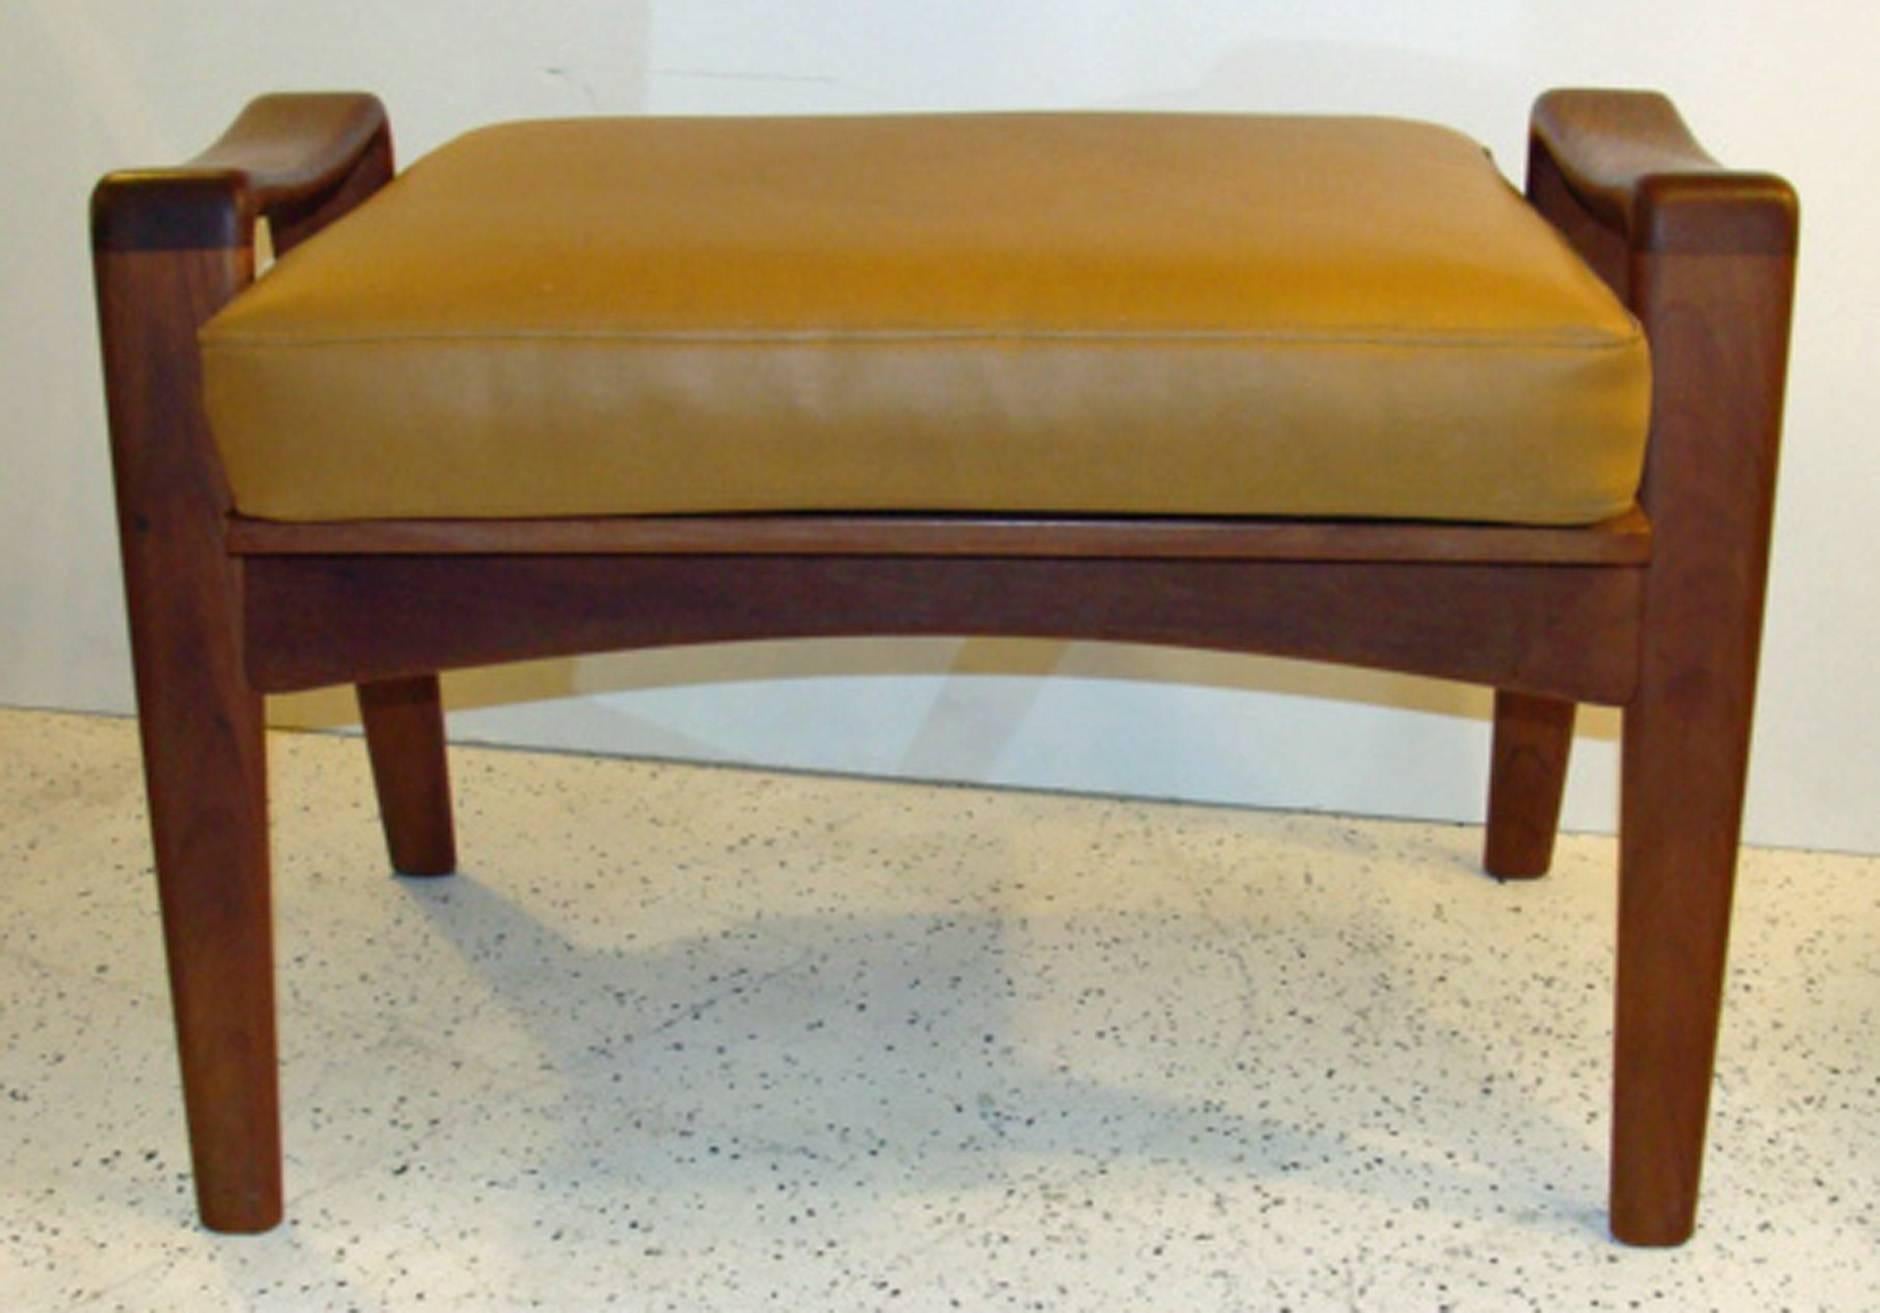 Rare pair of Mid-Century ottomans or footstools in teakwood. Designed by Arne Wahl Iversen for Komfort, Denmark. Retains original cushions and Fagas
straps. Priced individually at $850 each.